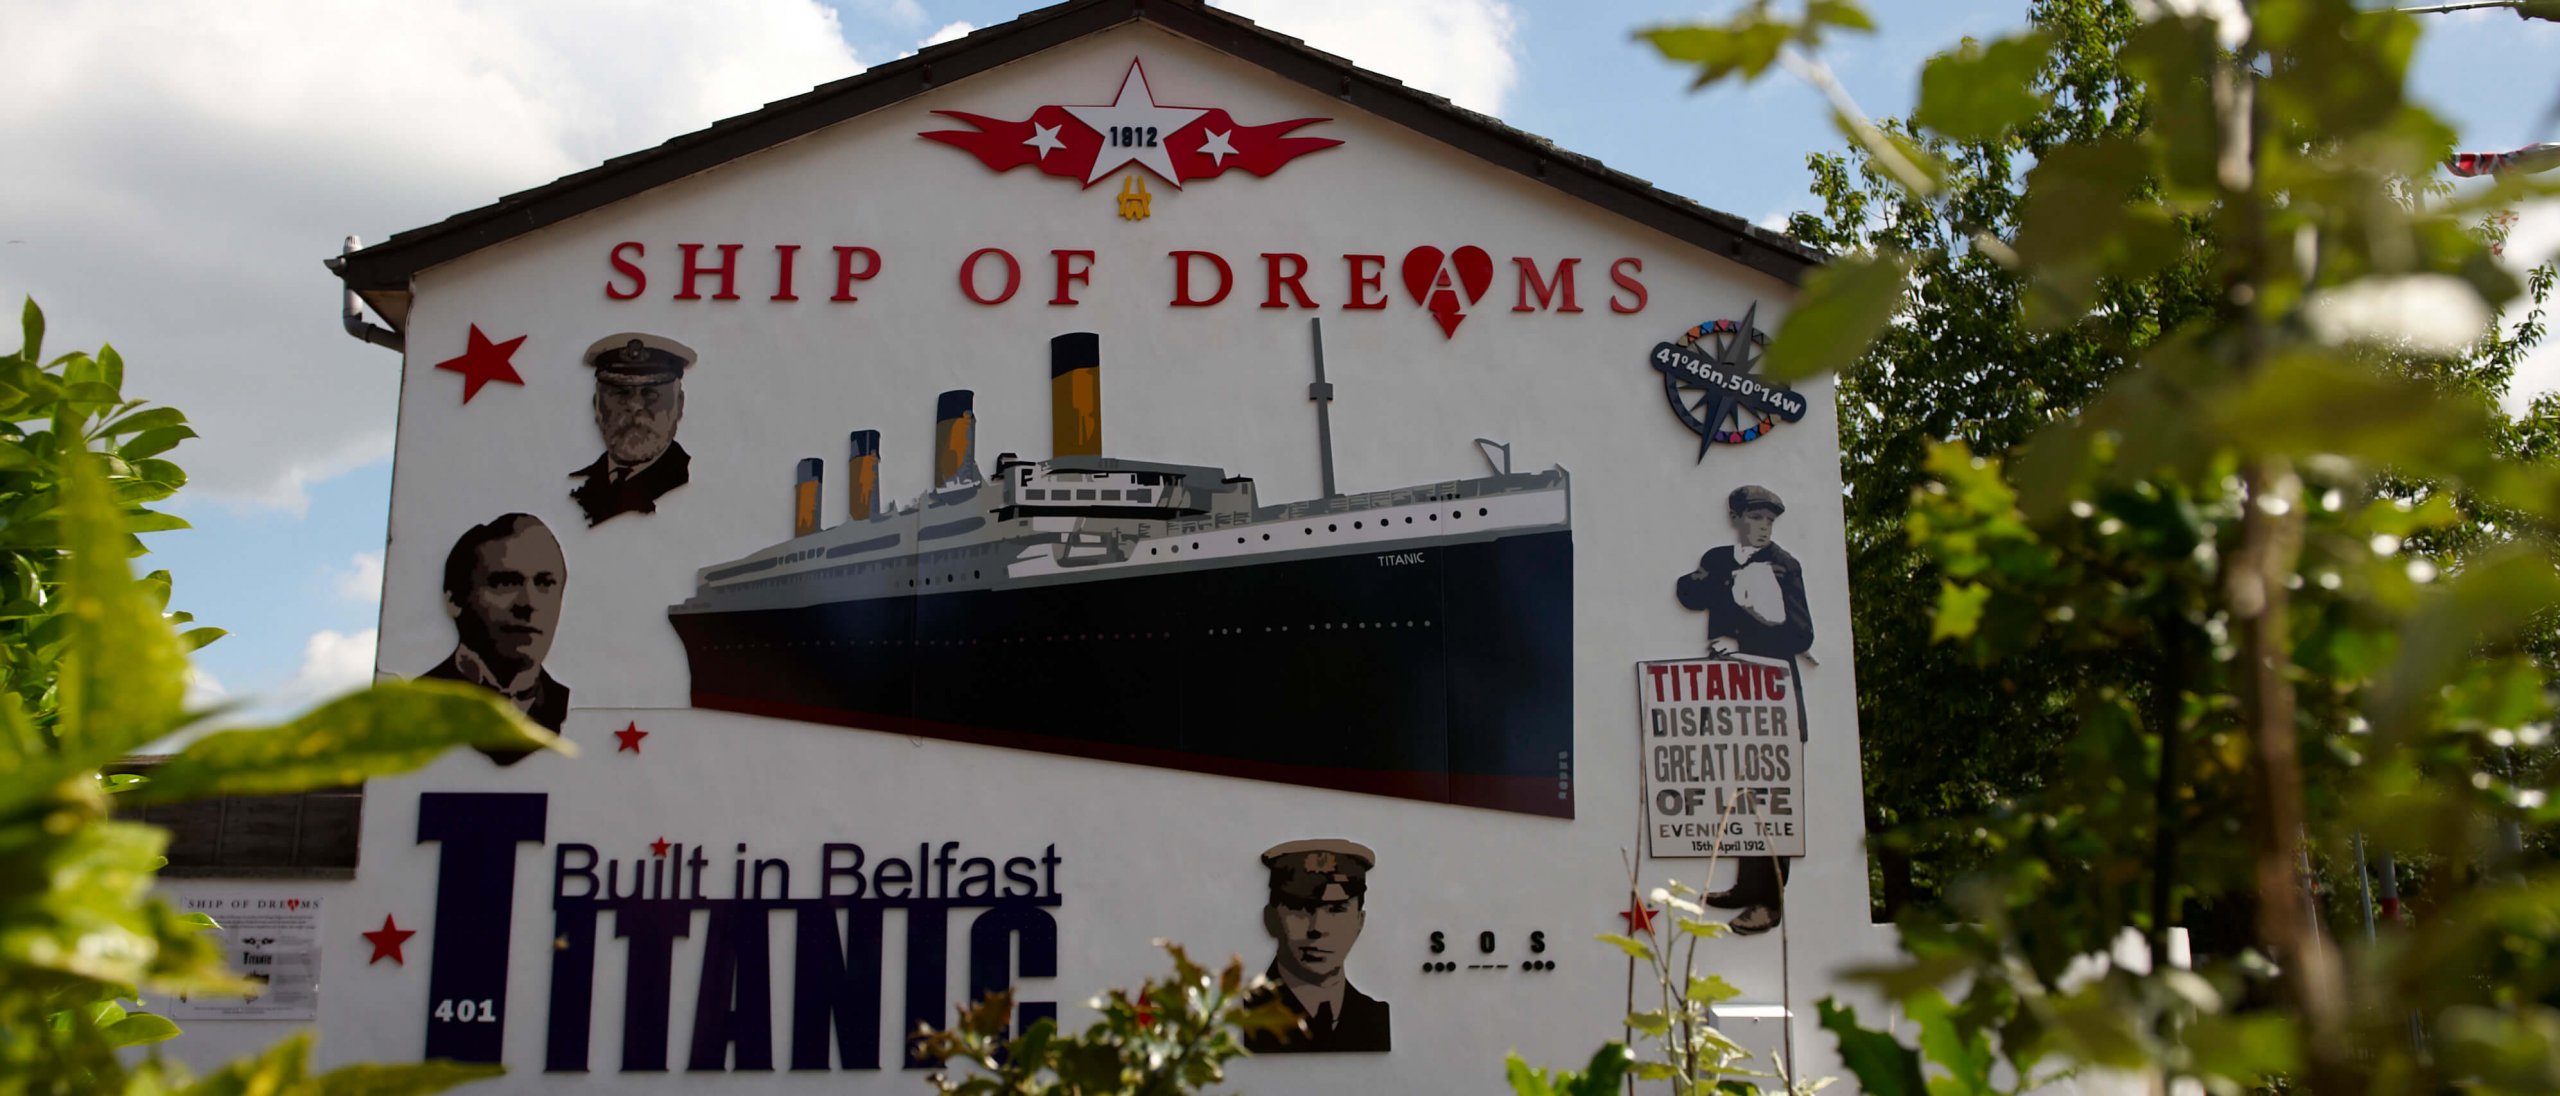 Titanic mural on a building in Belfast, Northern Ireland